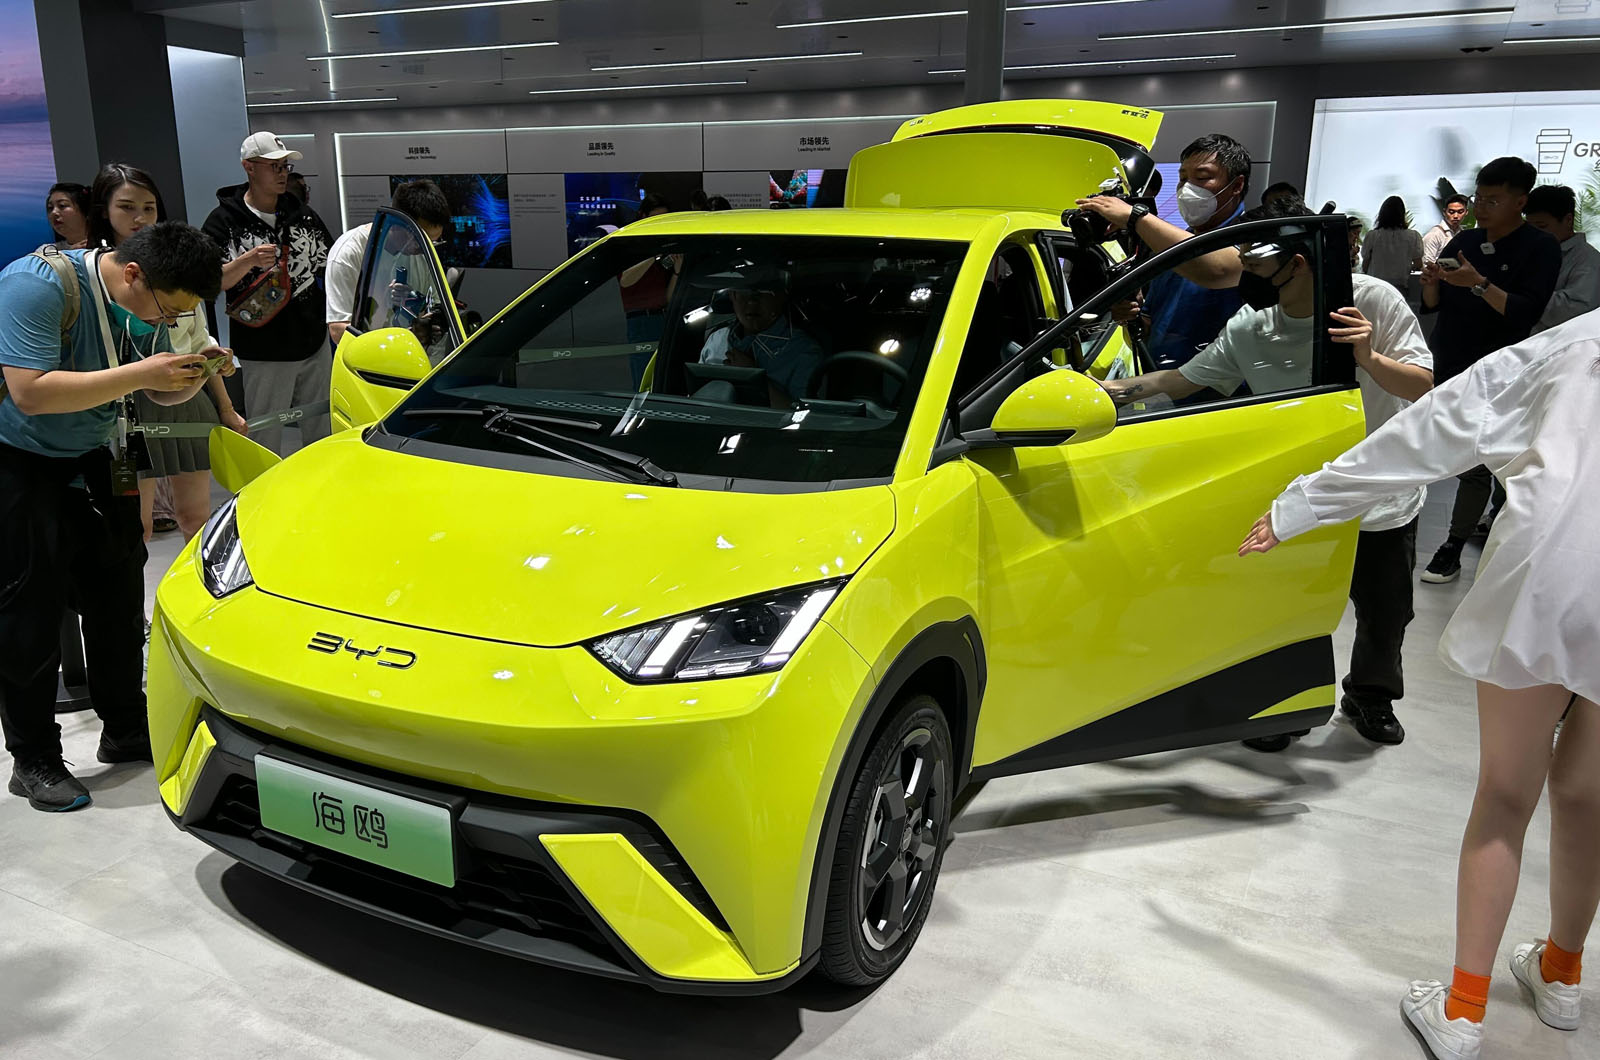 BYD Seagull is sub-£8000 electric supermini for China